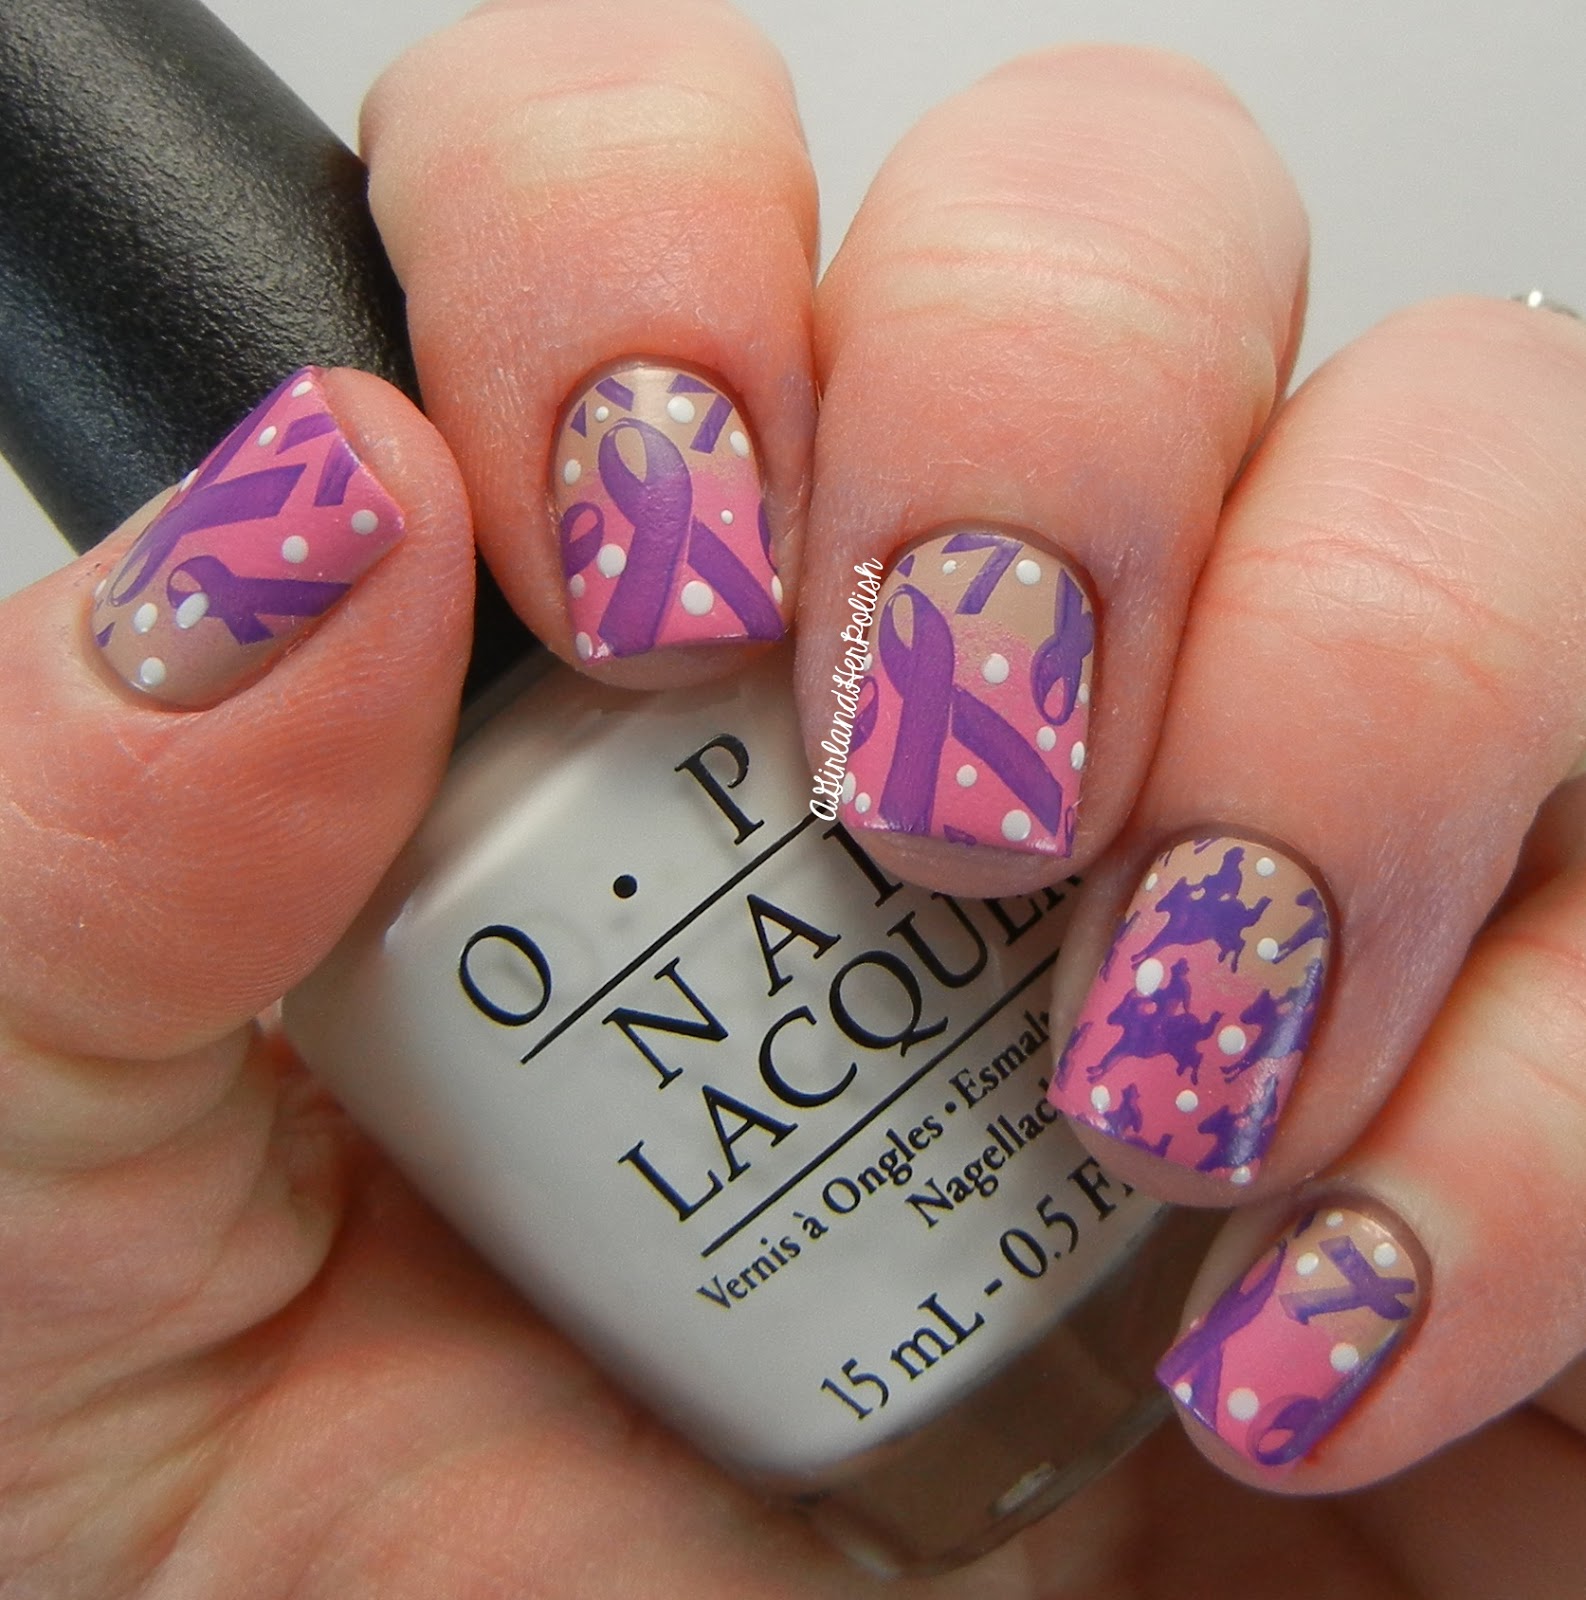 A Girl and Her Polish: Relay For Life Nails1586 x 1600